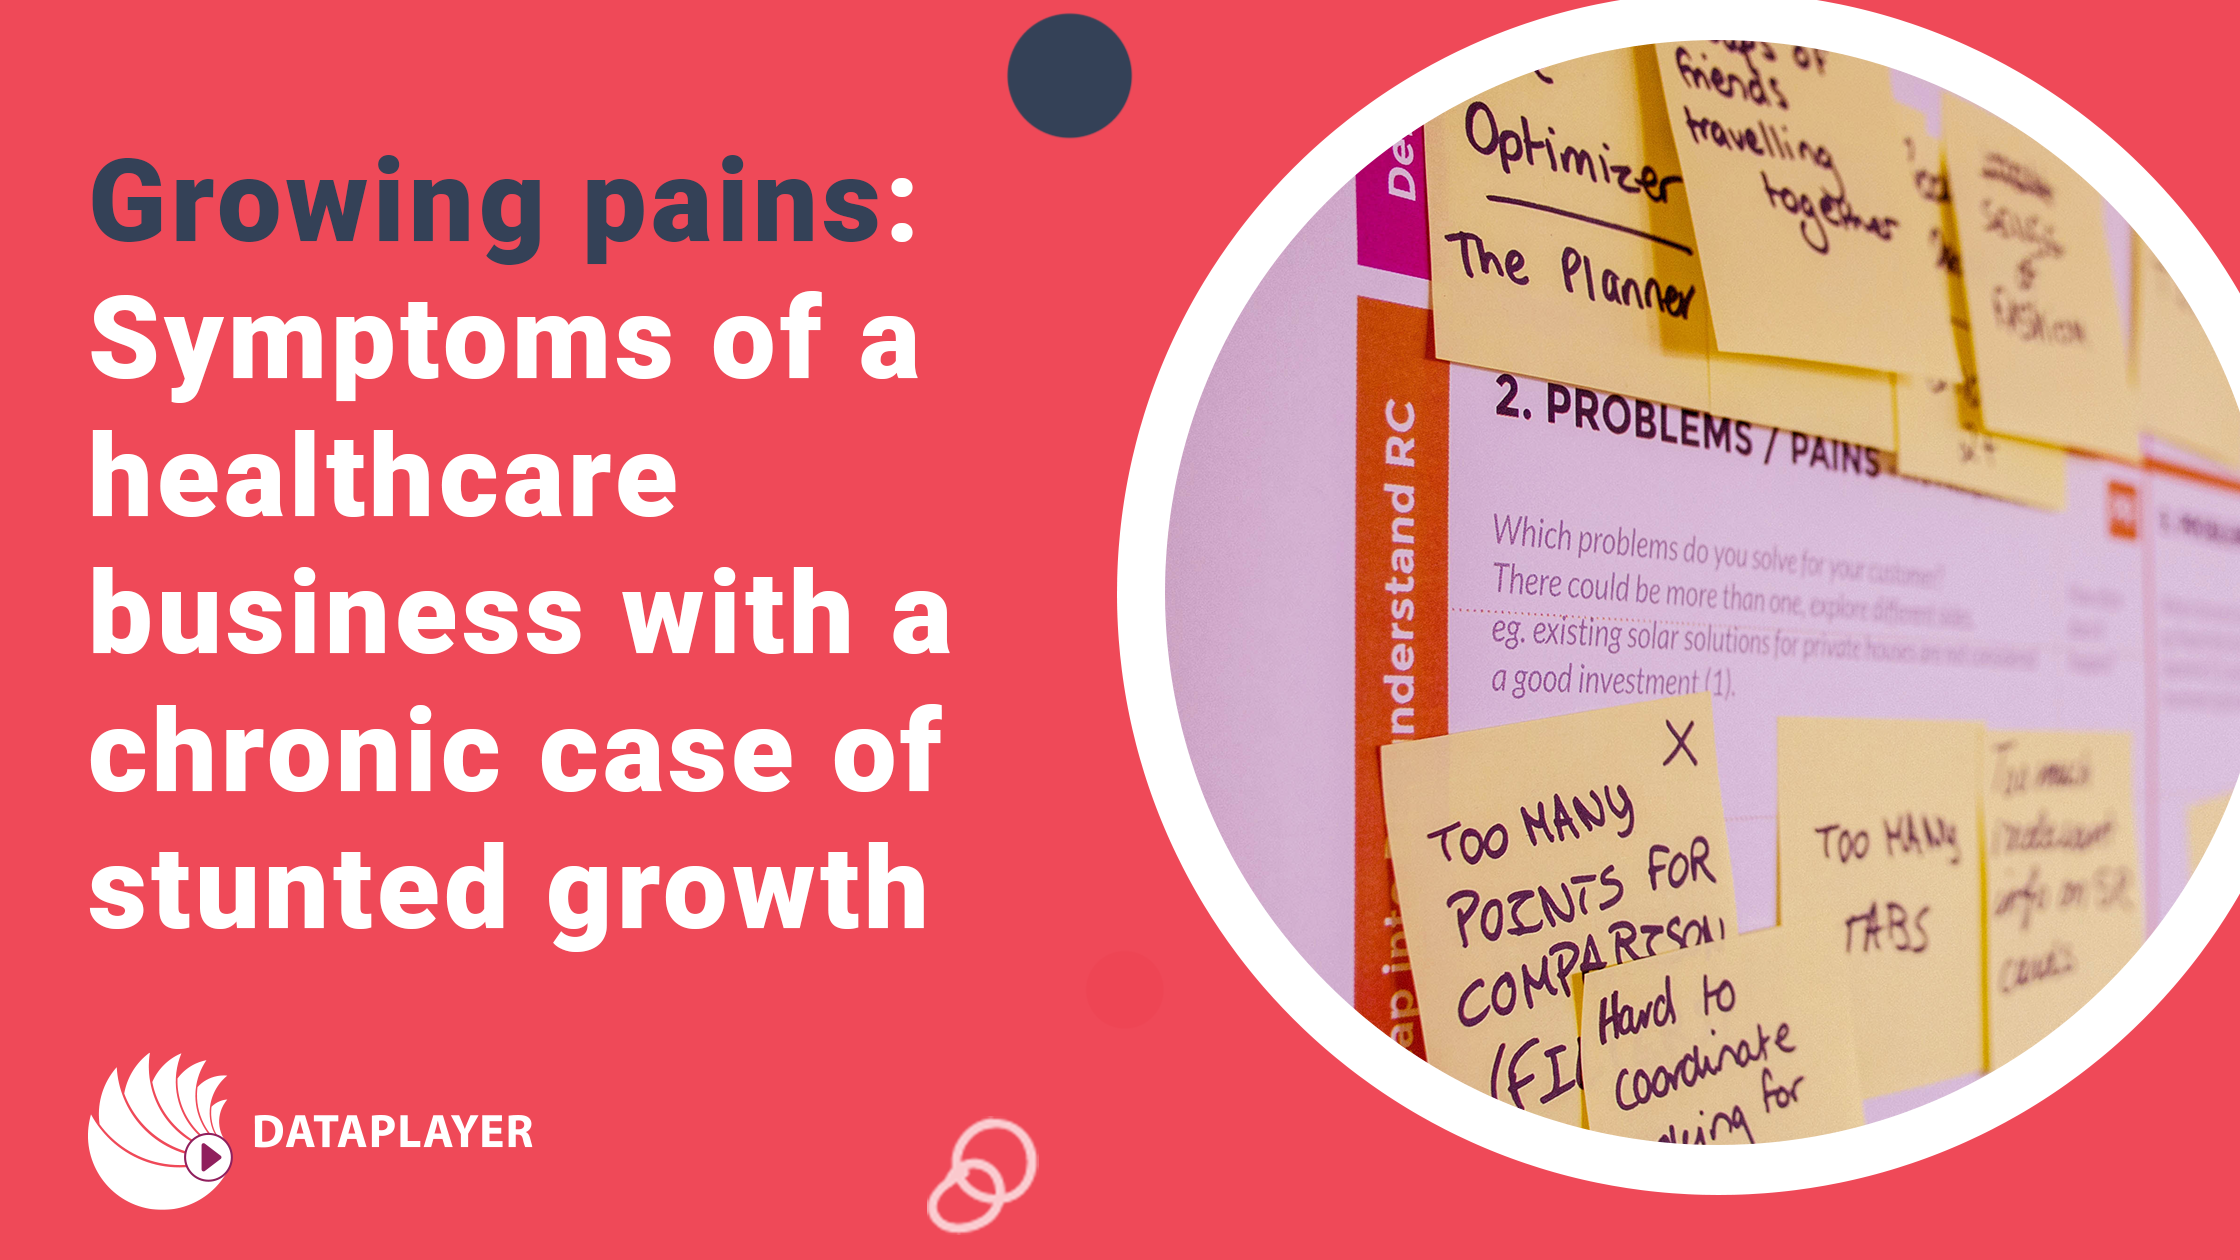 Growing pains: Symptoms of a healthcare business with a chronic case of stunted growth